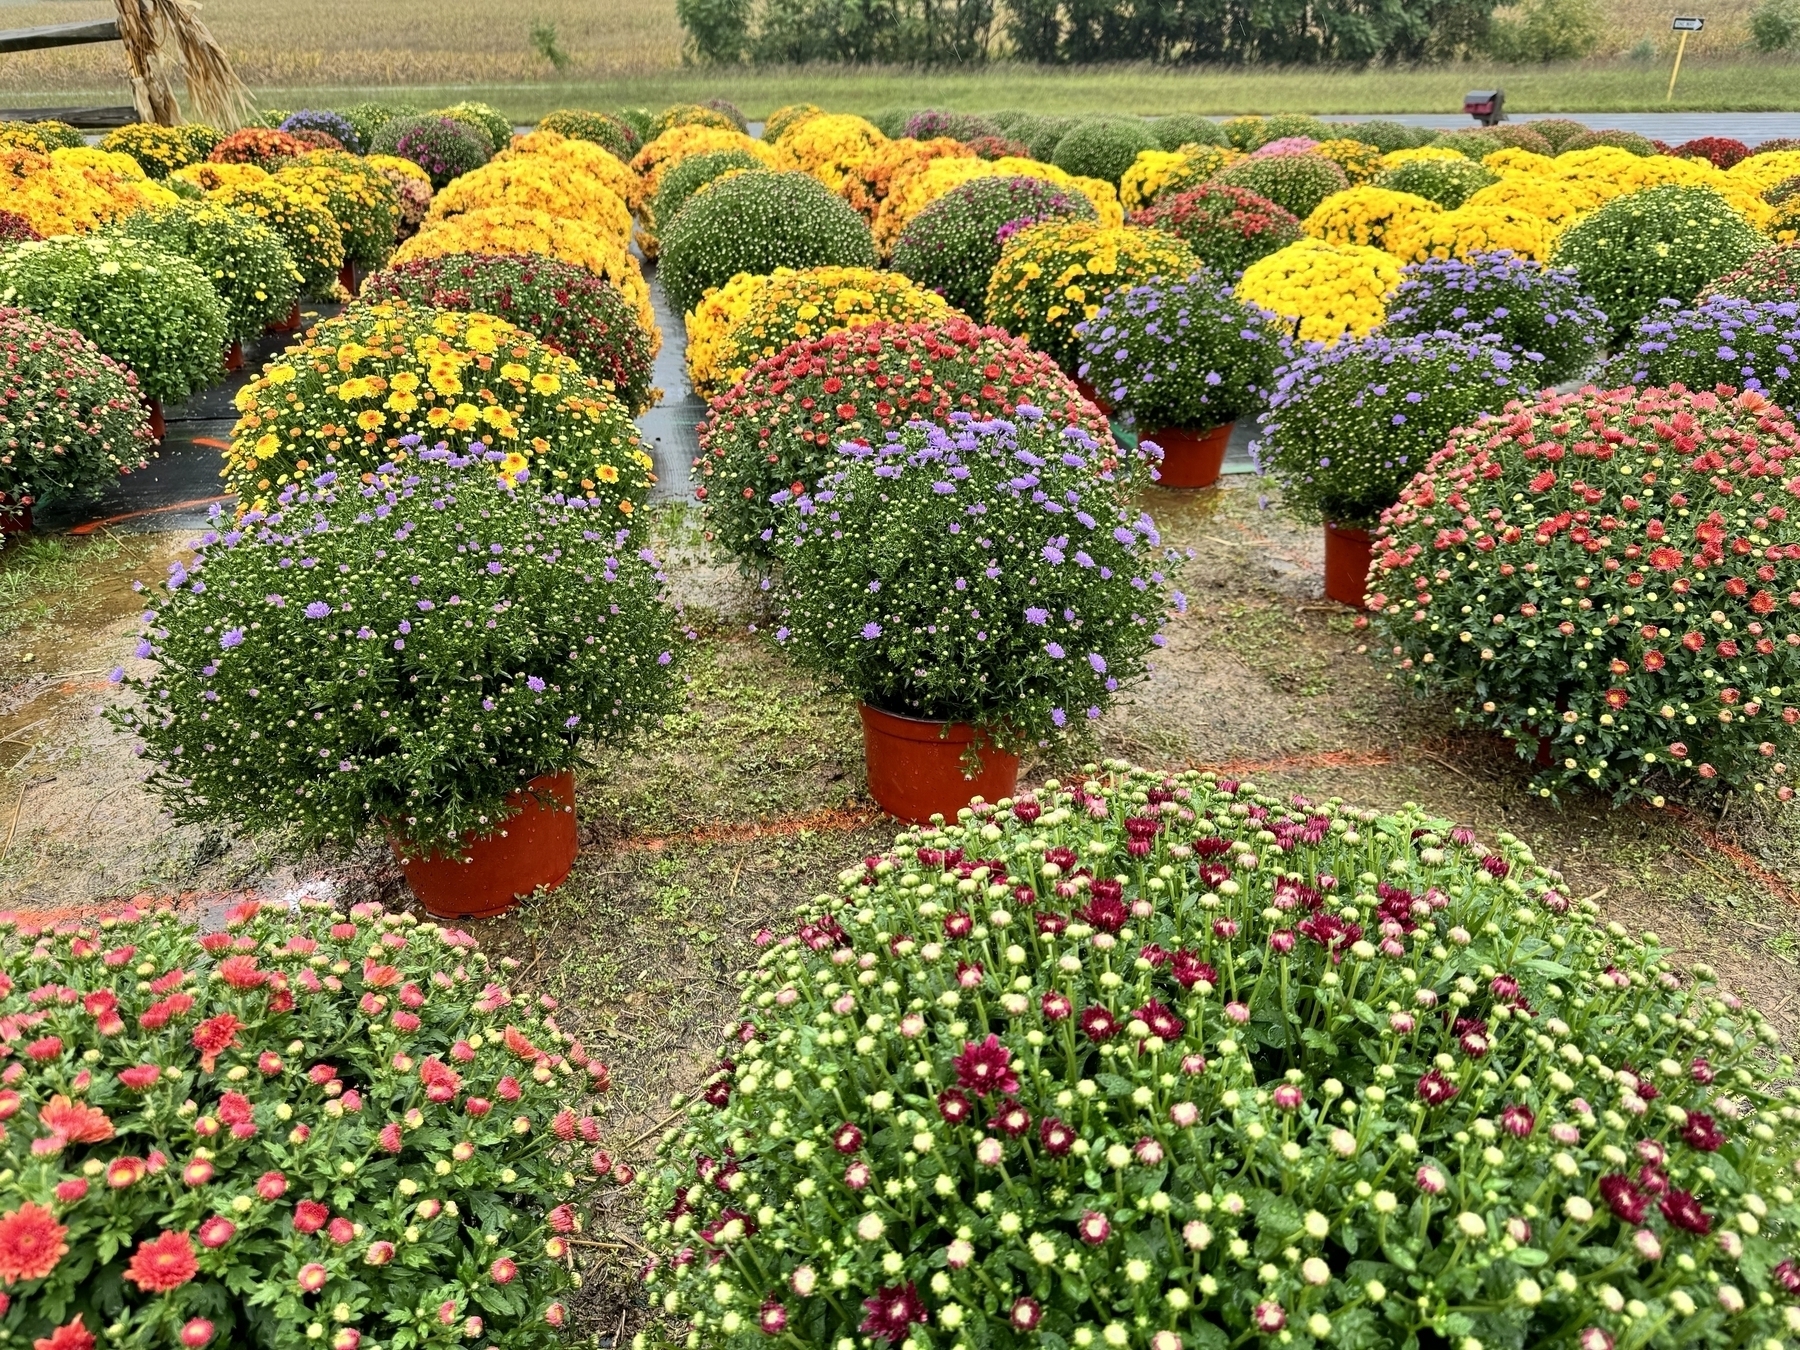 Rows of colored mum flowers